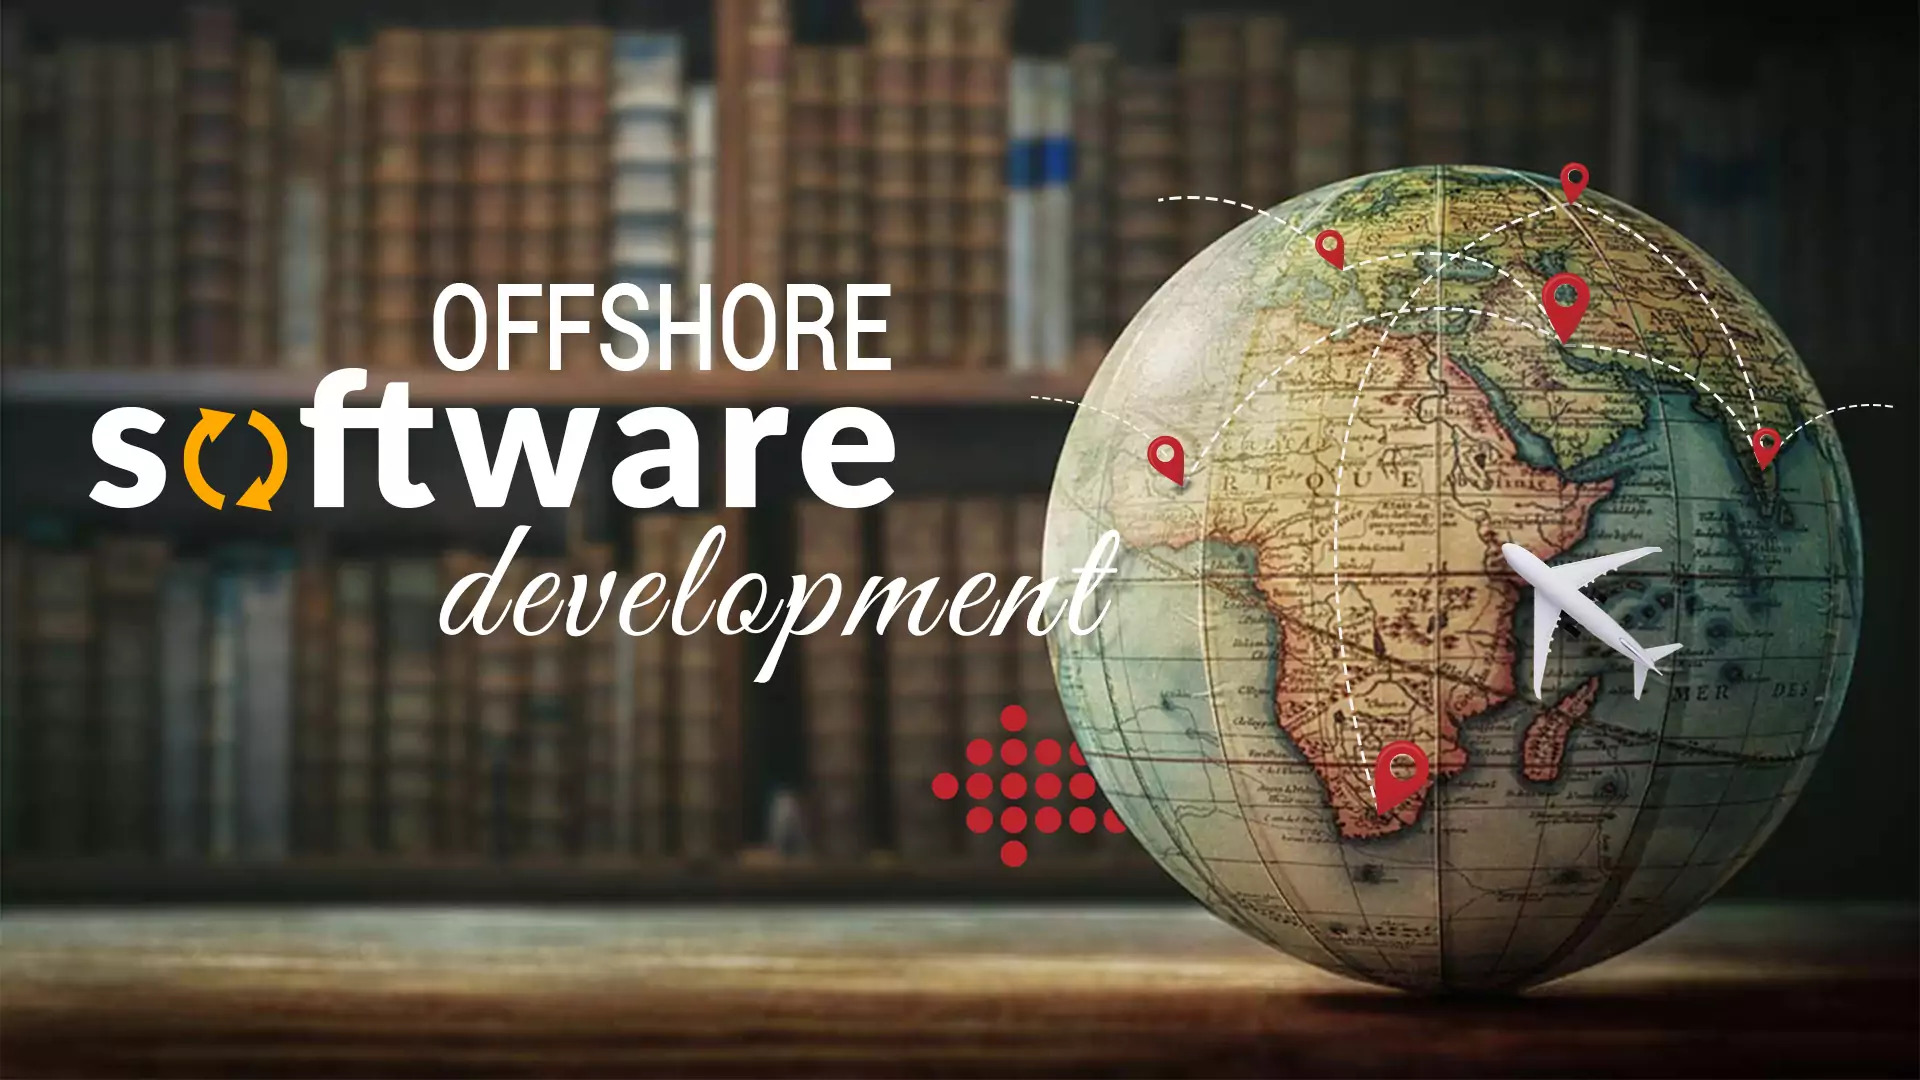 A brief guide to offshore software development